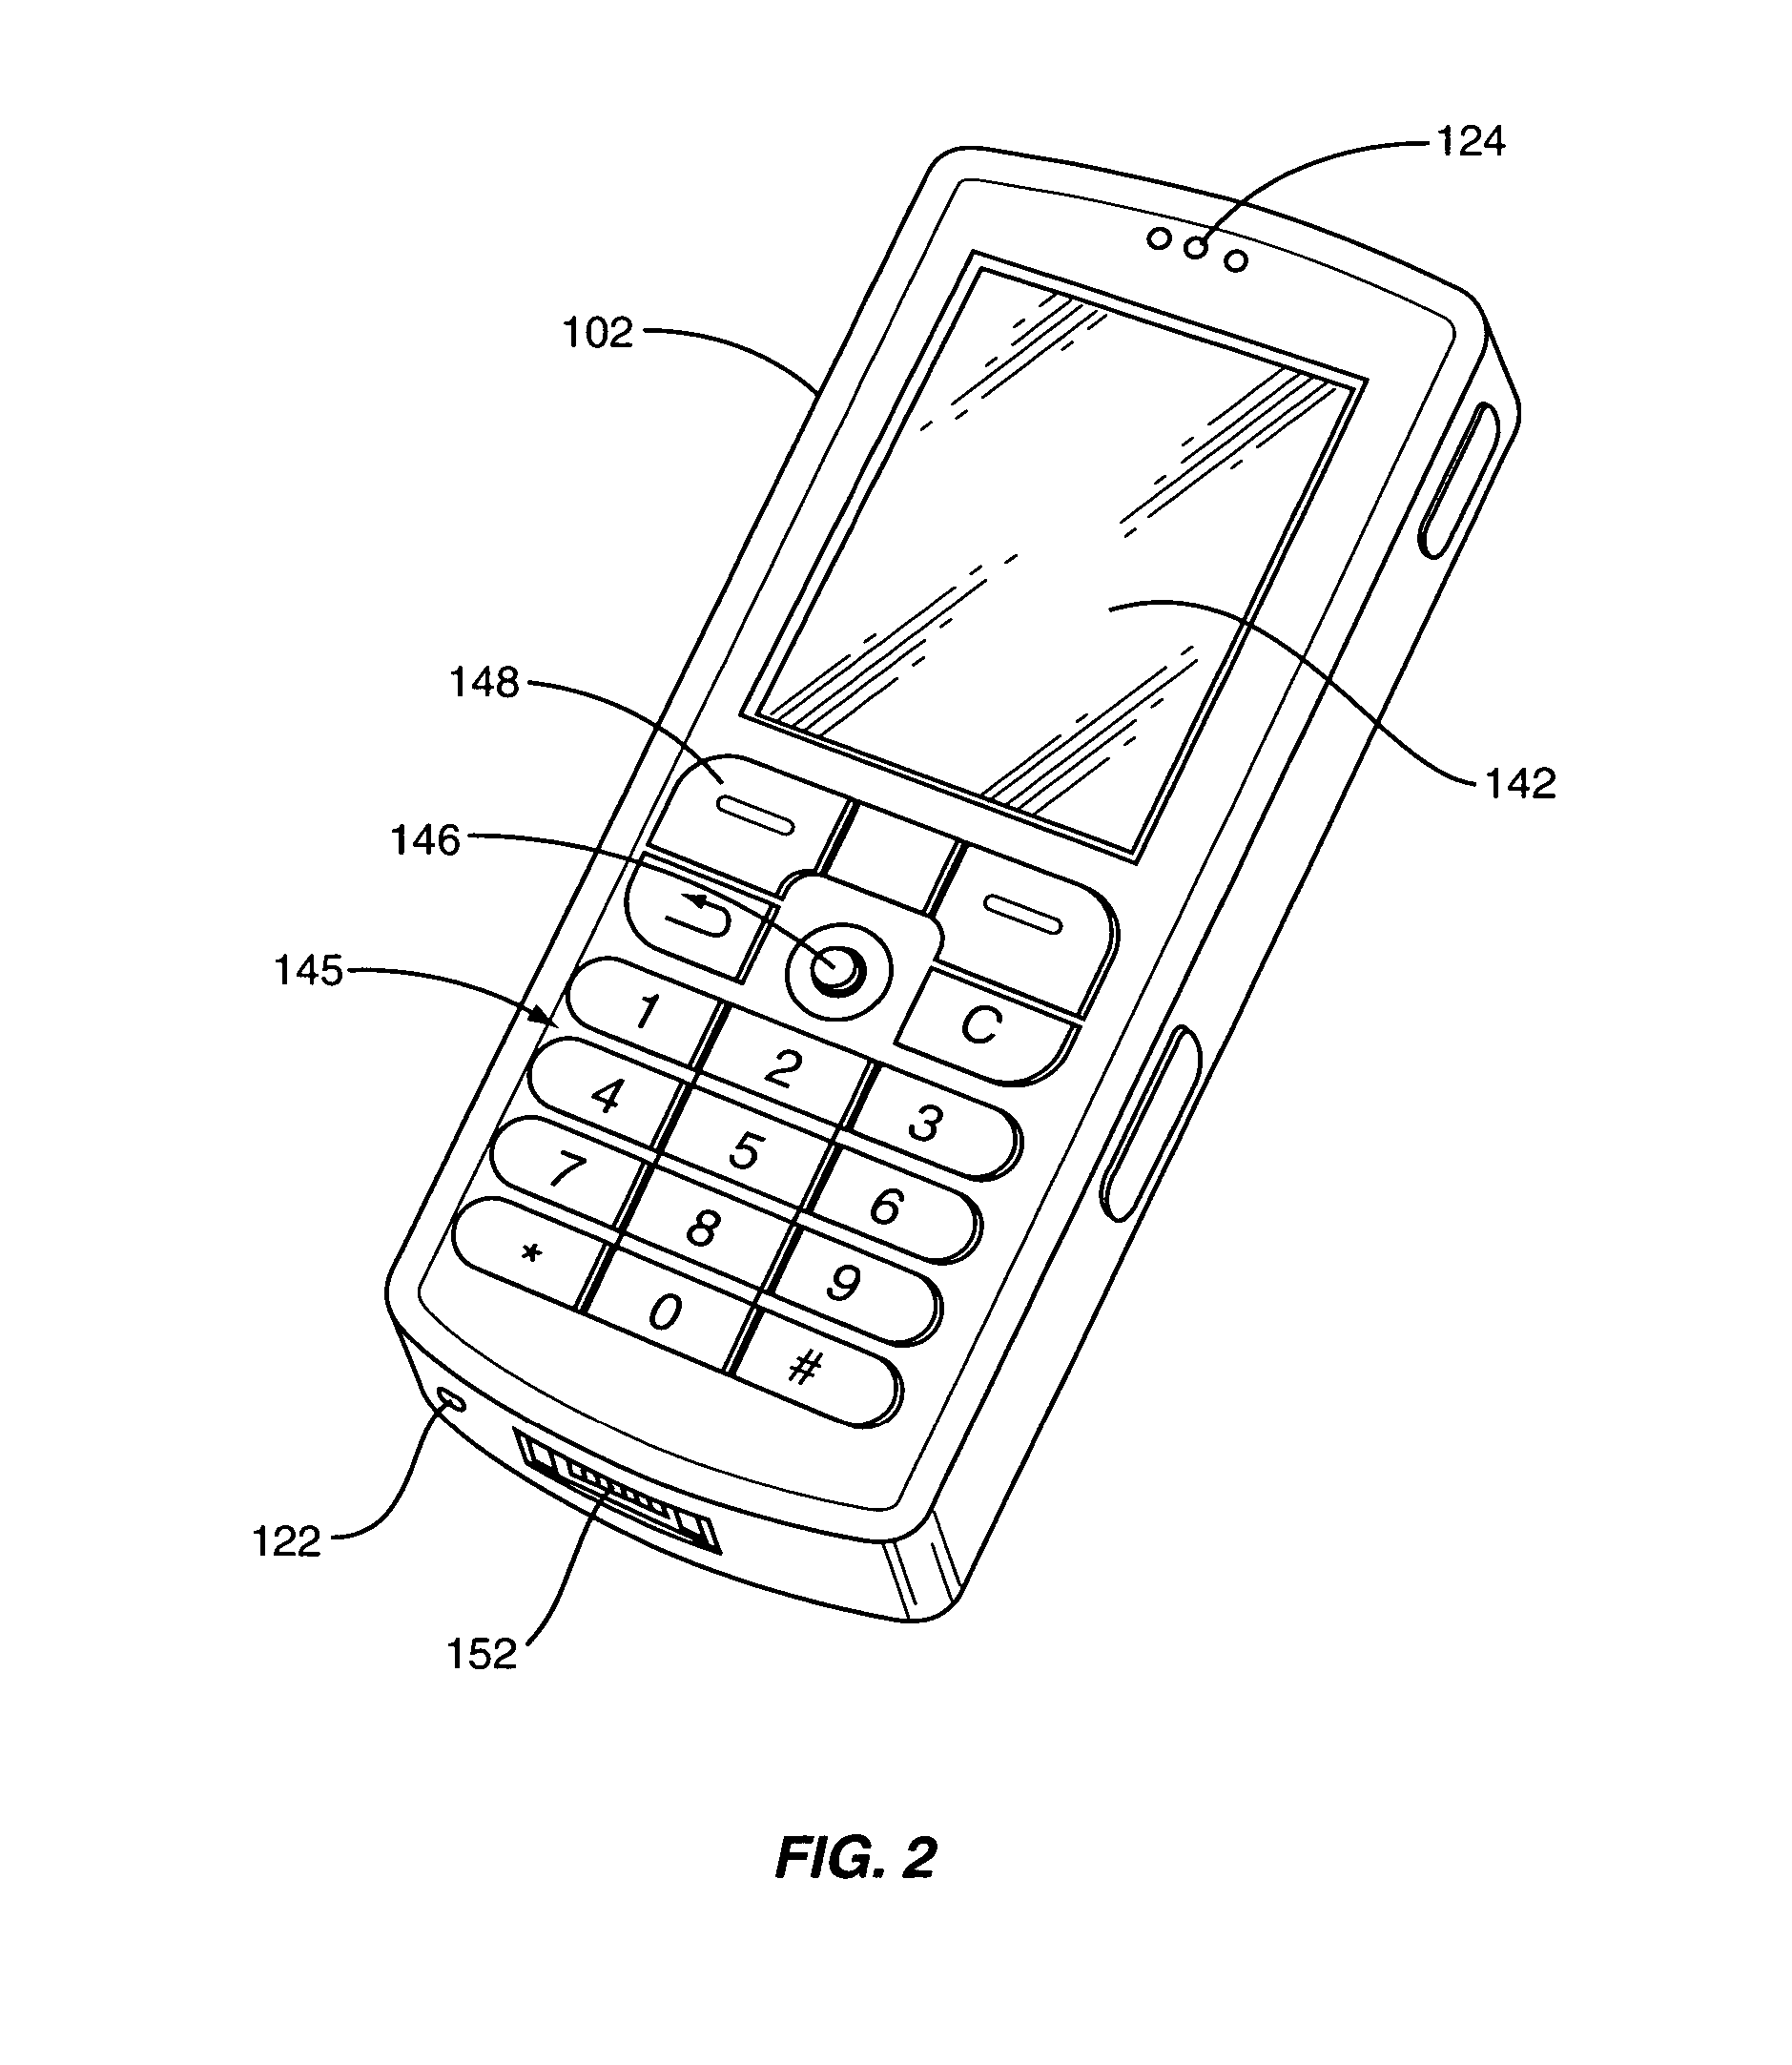 Audio profiles for portable music playback device